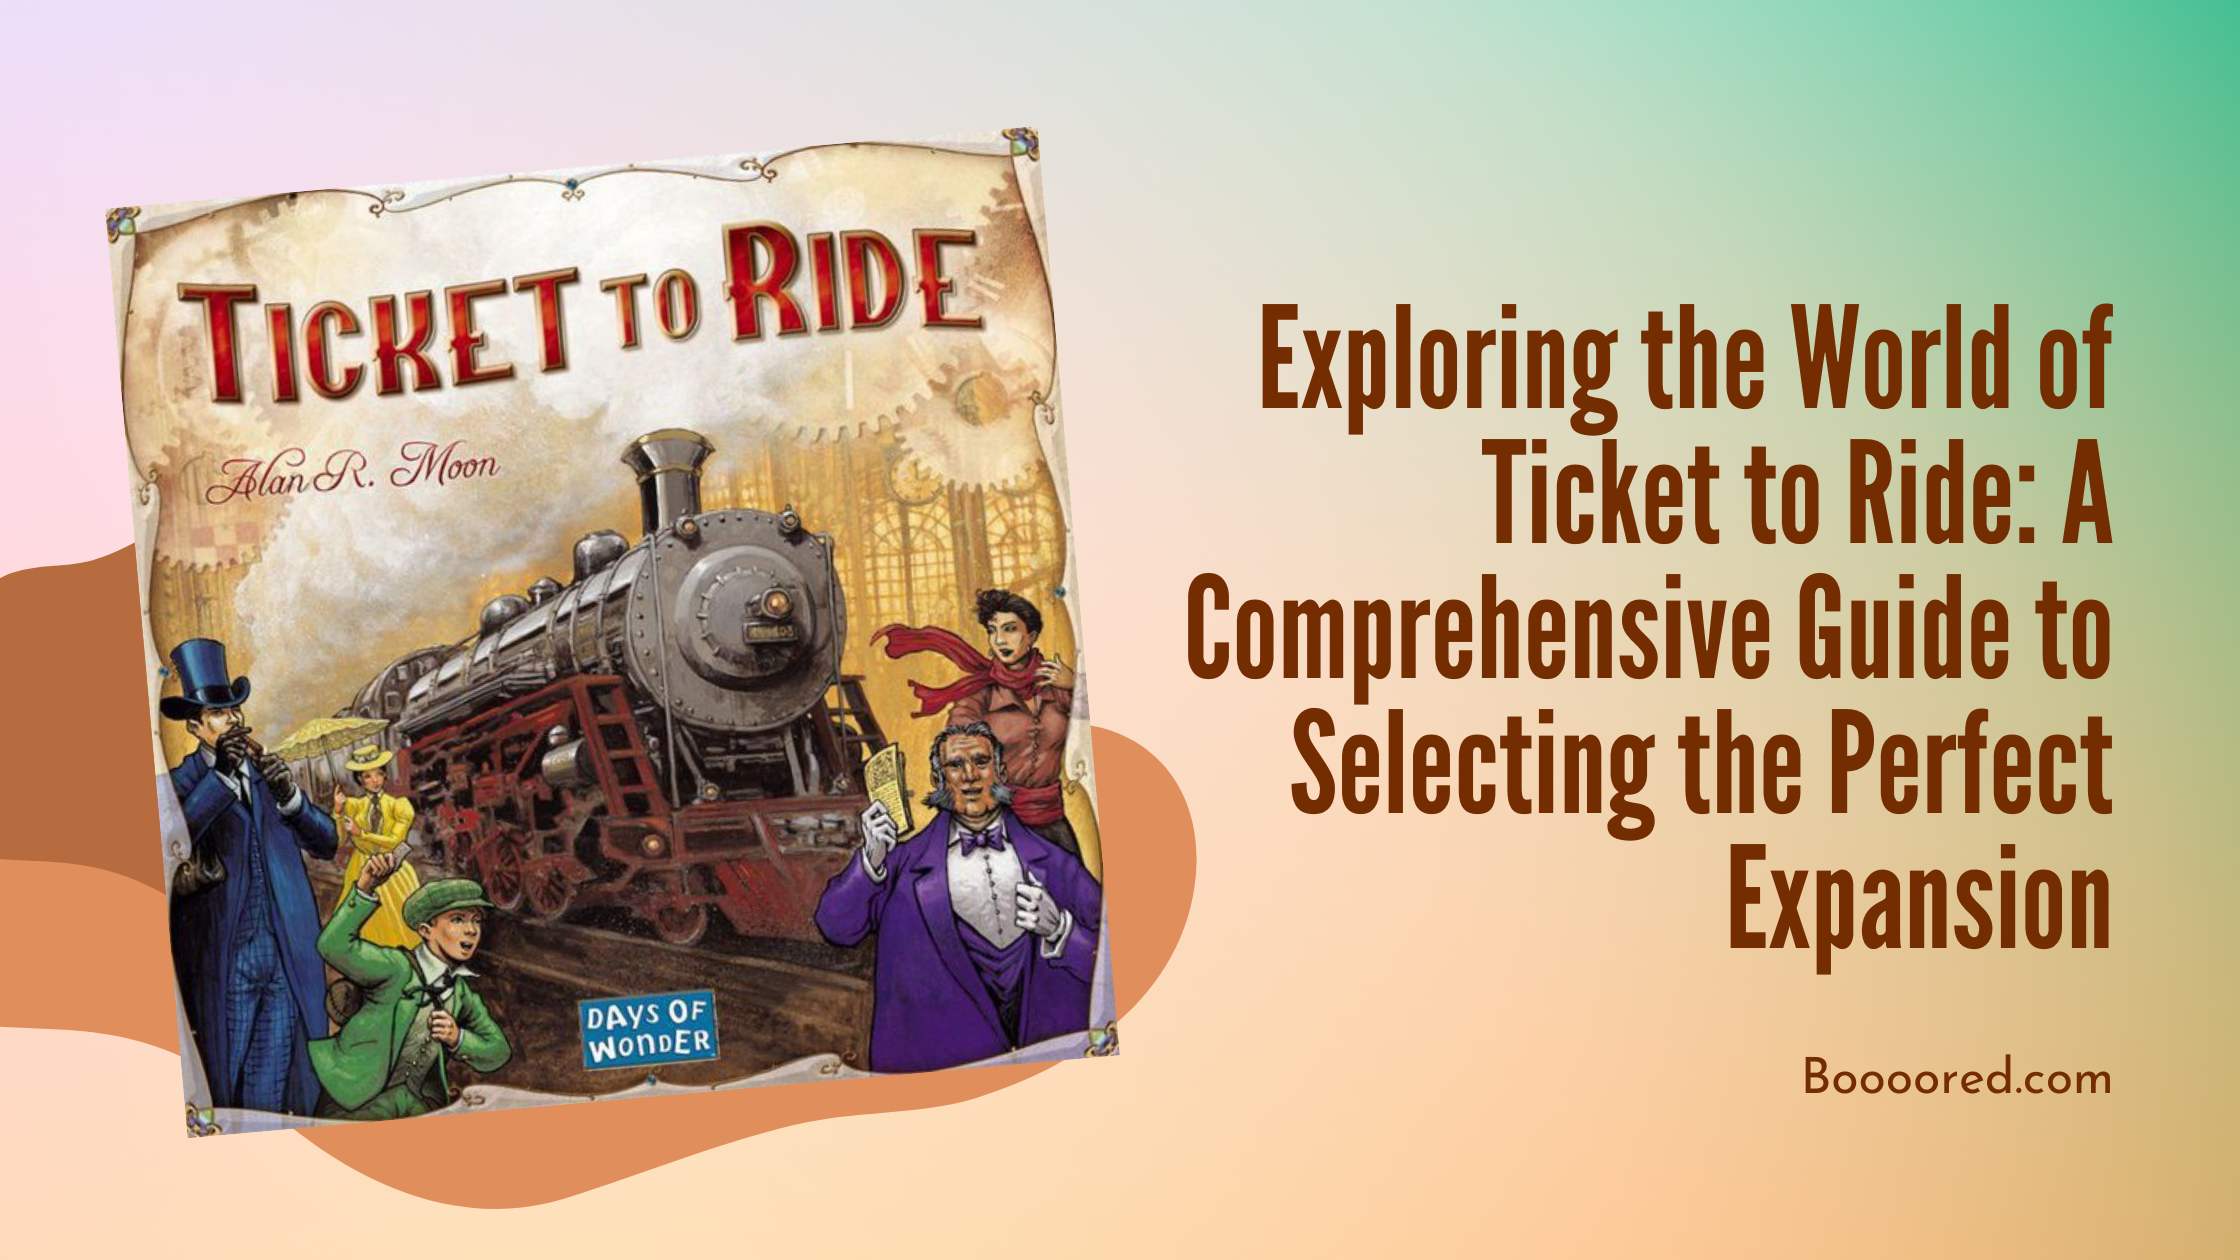 Exploring the World of Ticket to Ride: A Comprehensive Guide to Selecting the Perfect Expansion